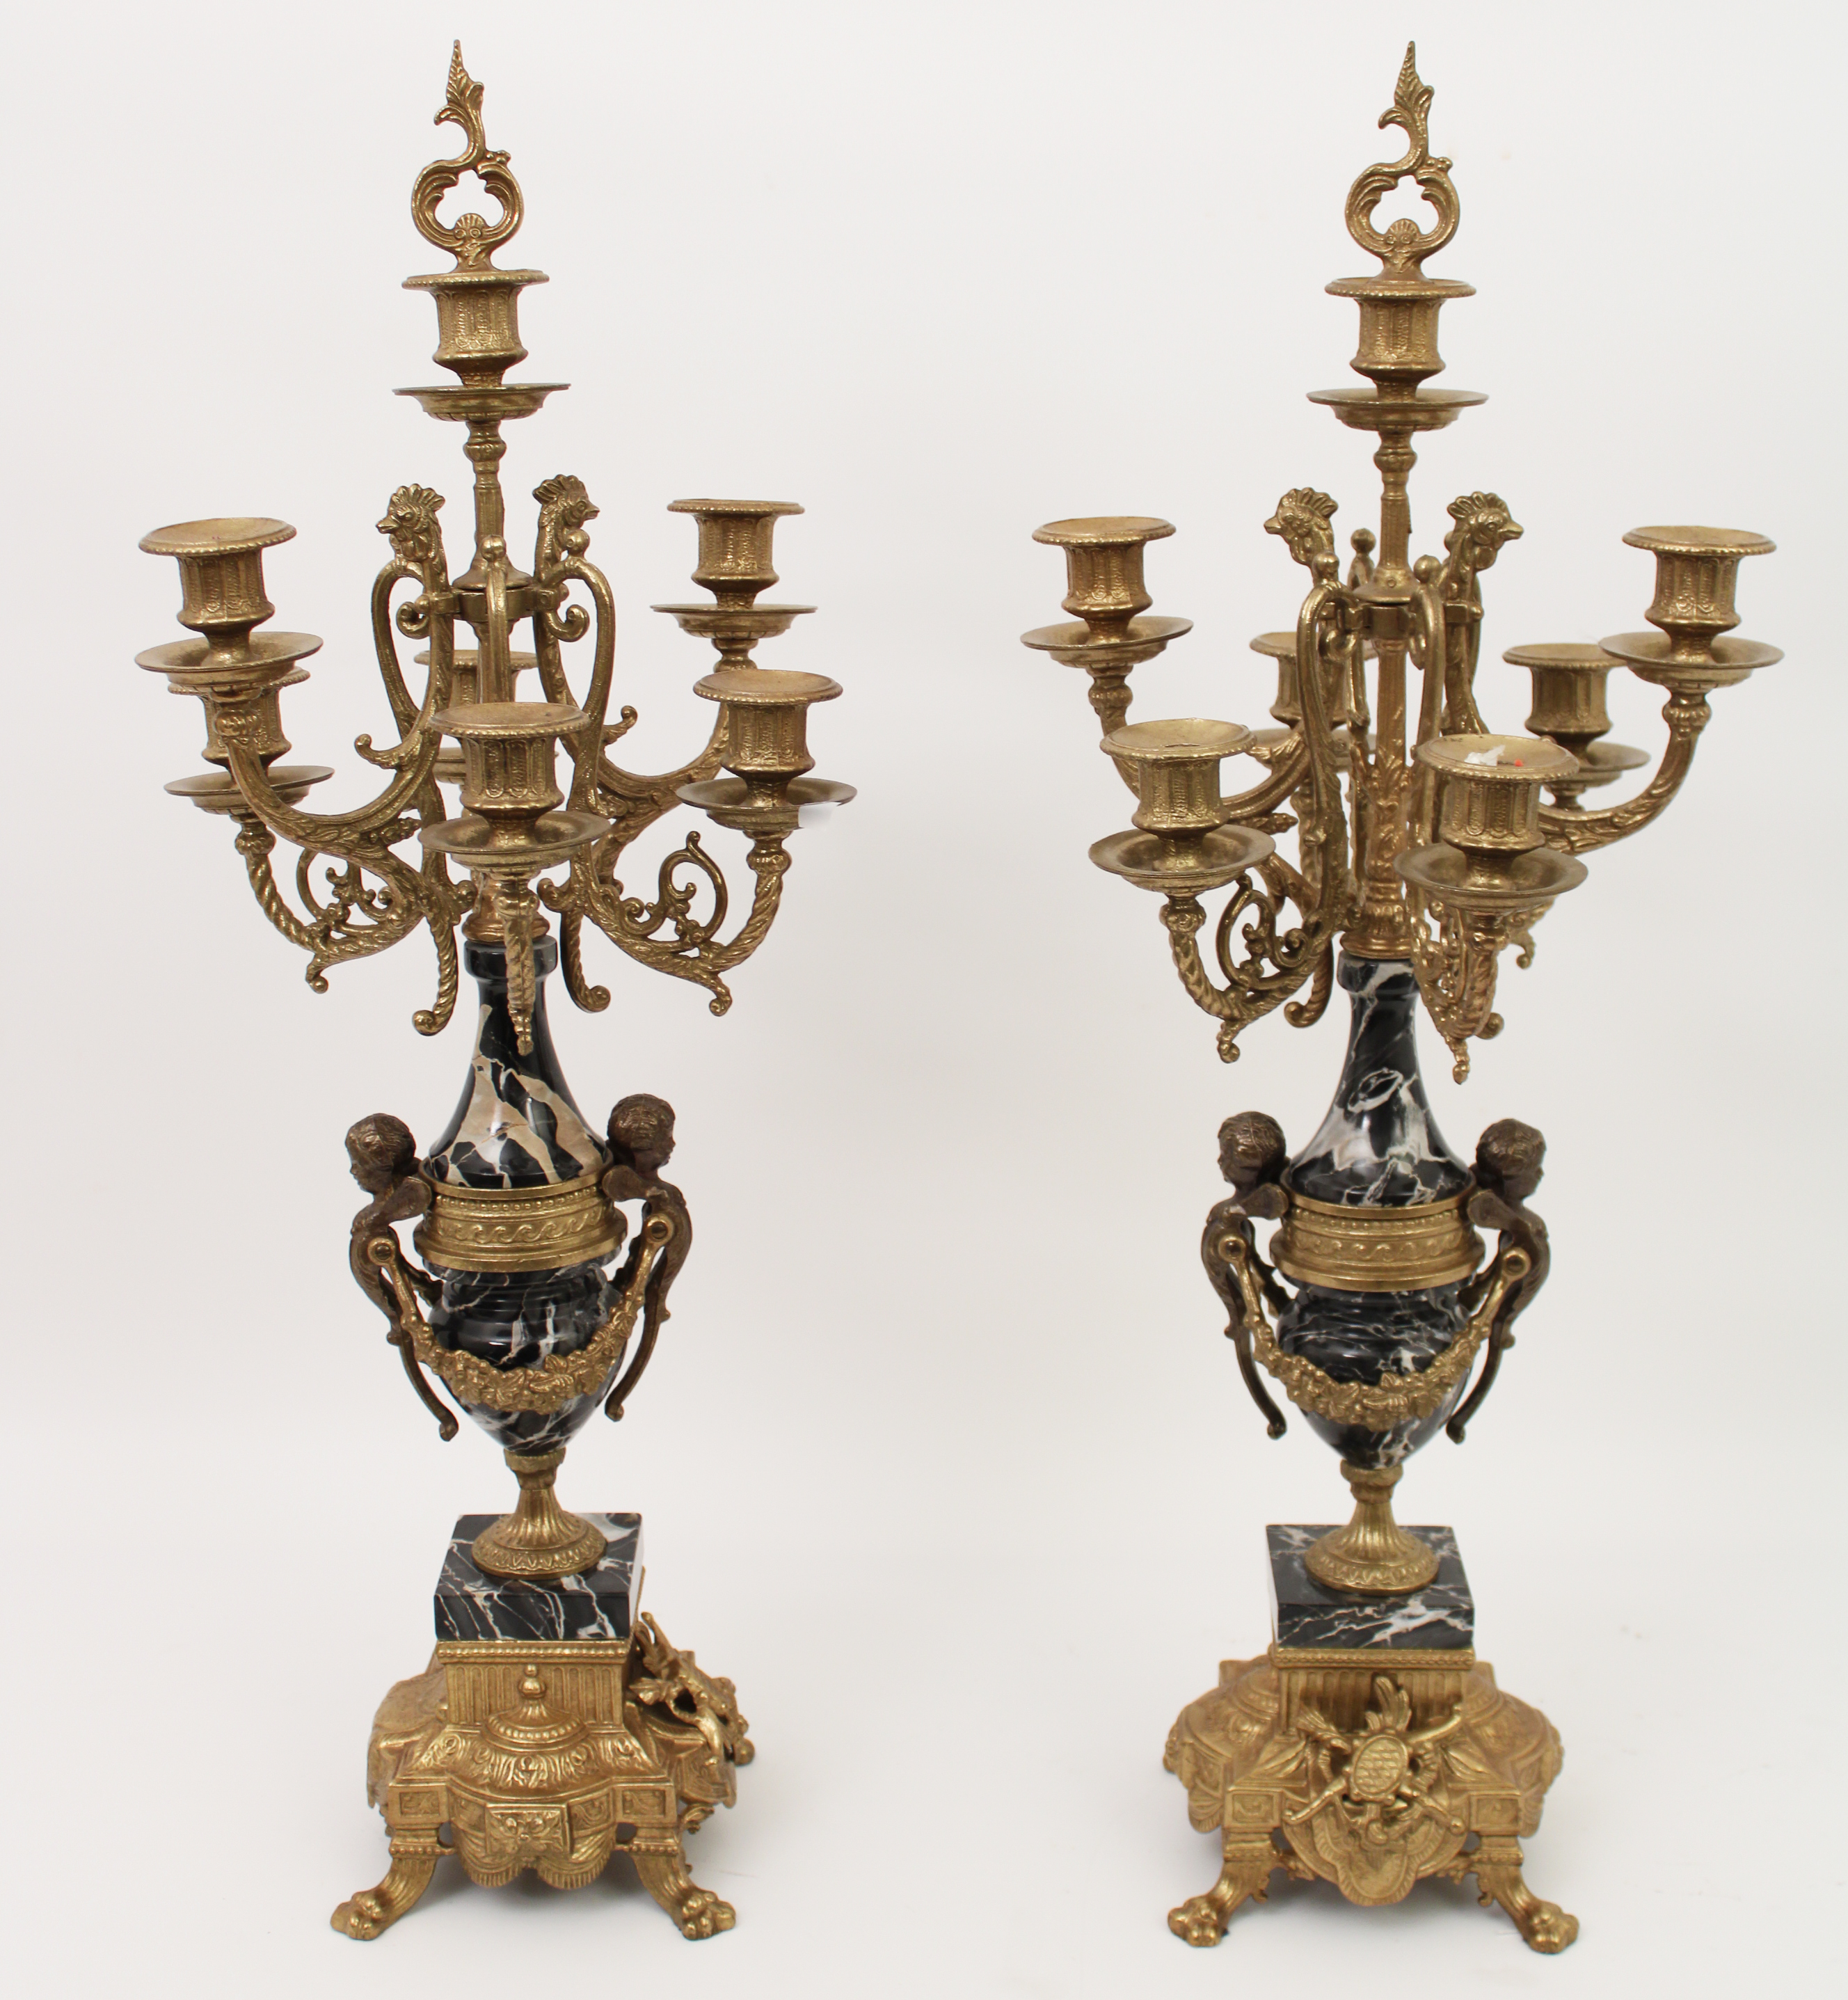 PAIR OF FRENCH BRONZE AND MARBLE